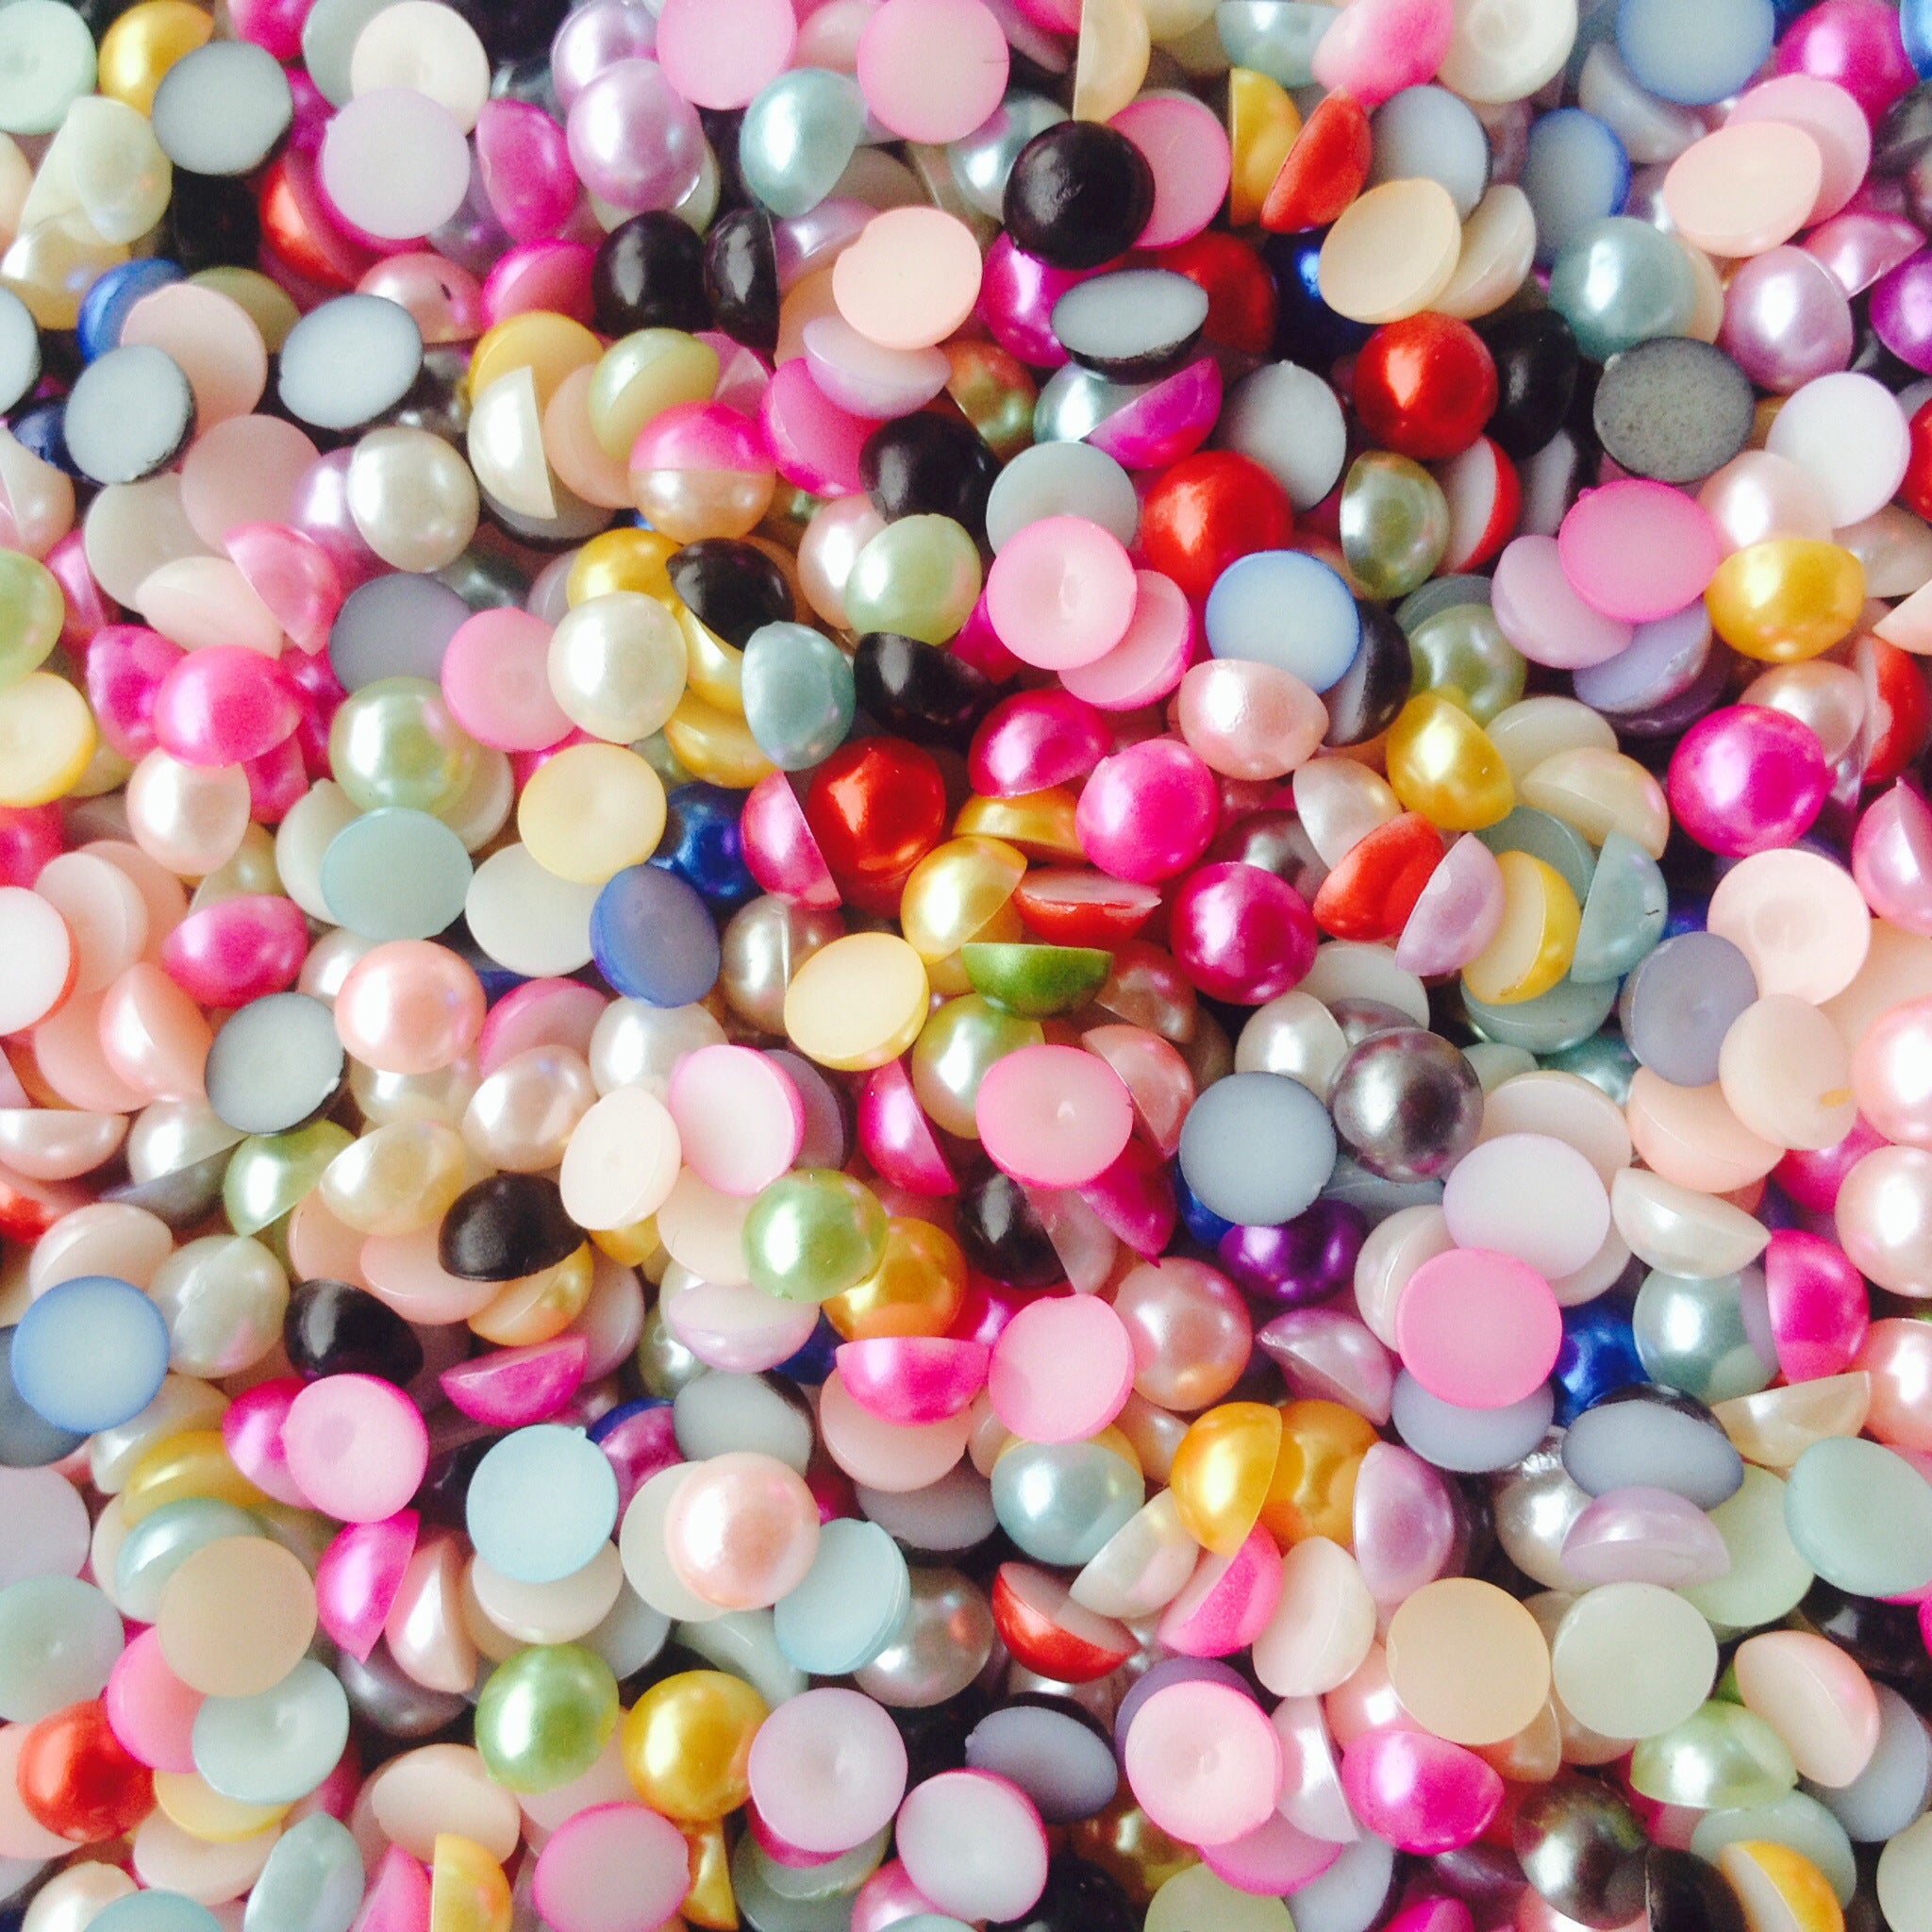 MajorCrafts Mixed Solid Colours Flat Back Half Round Resin Pearls C00